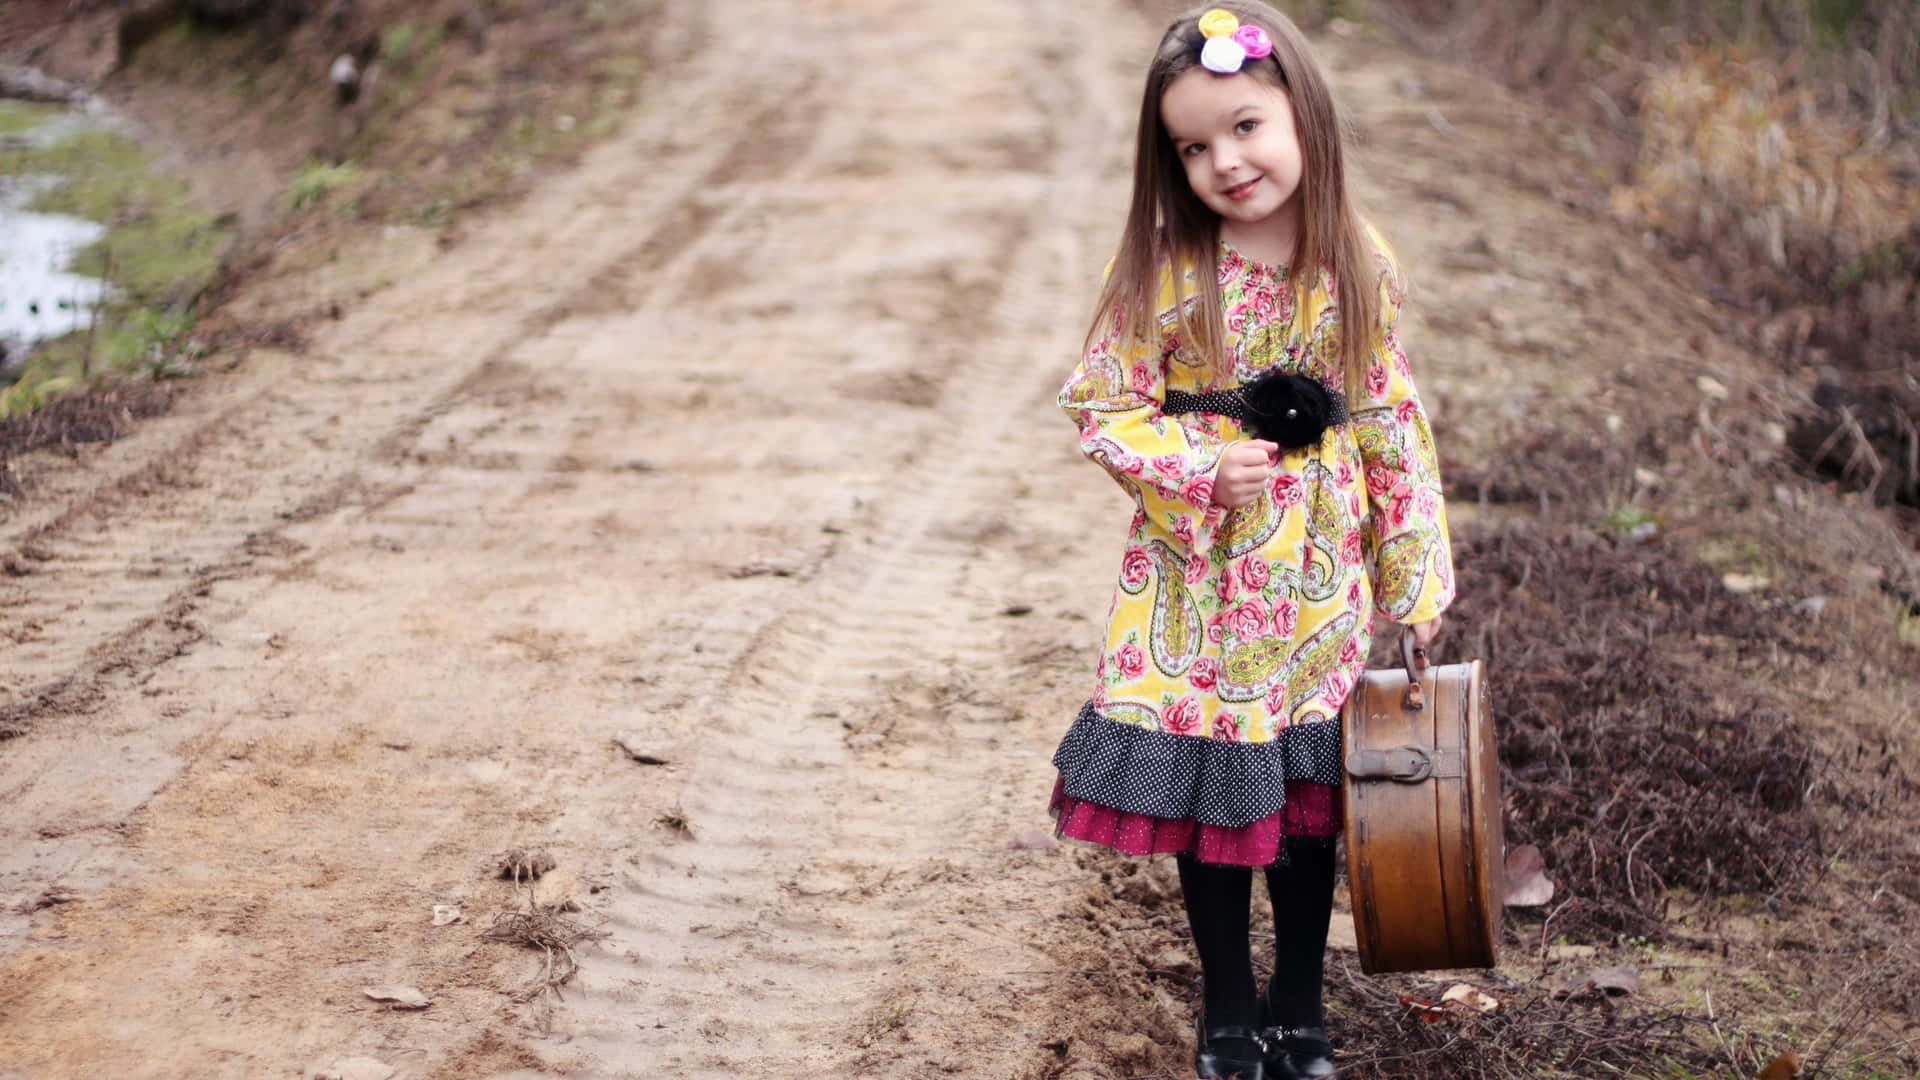 A Little Girl Holding A Suitcase On A Dirt Road